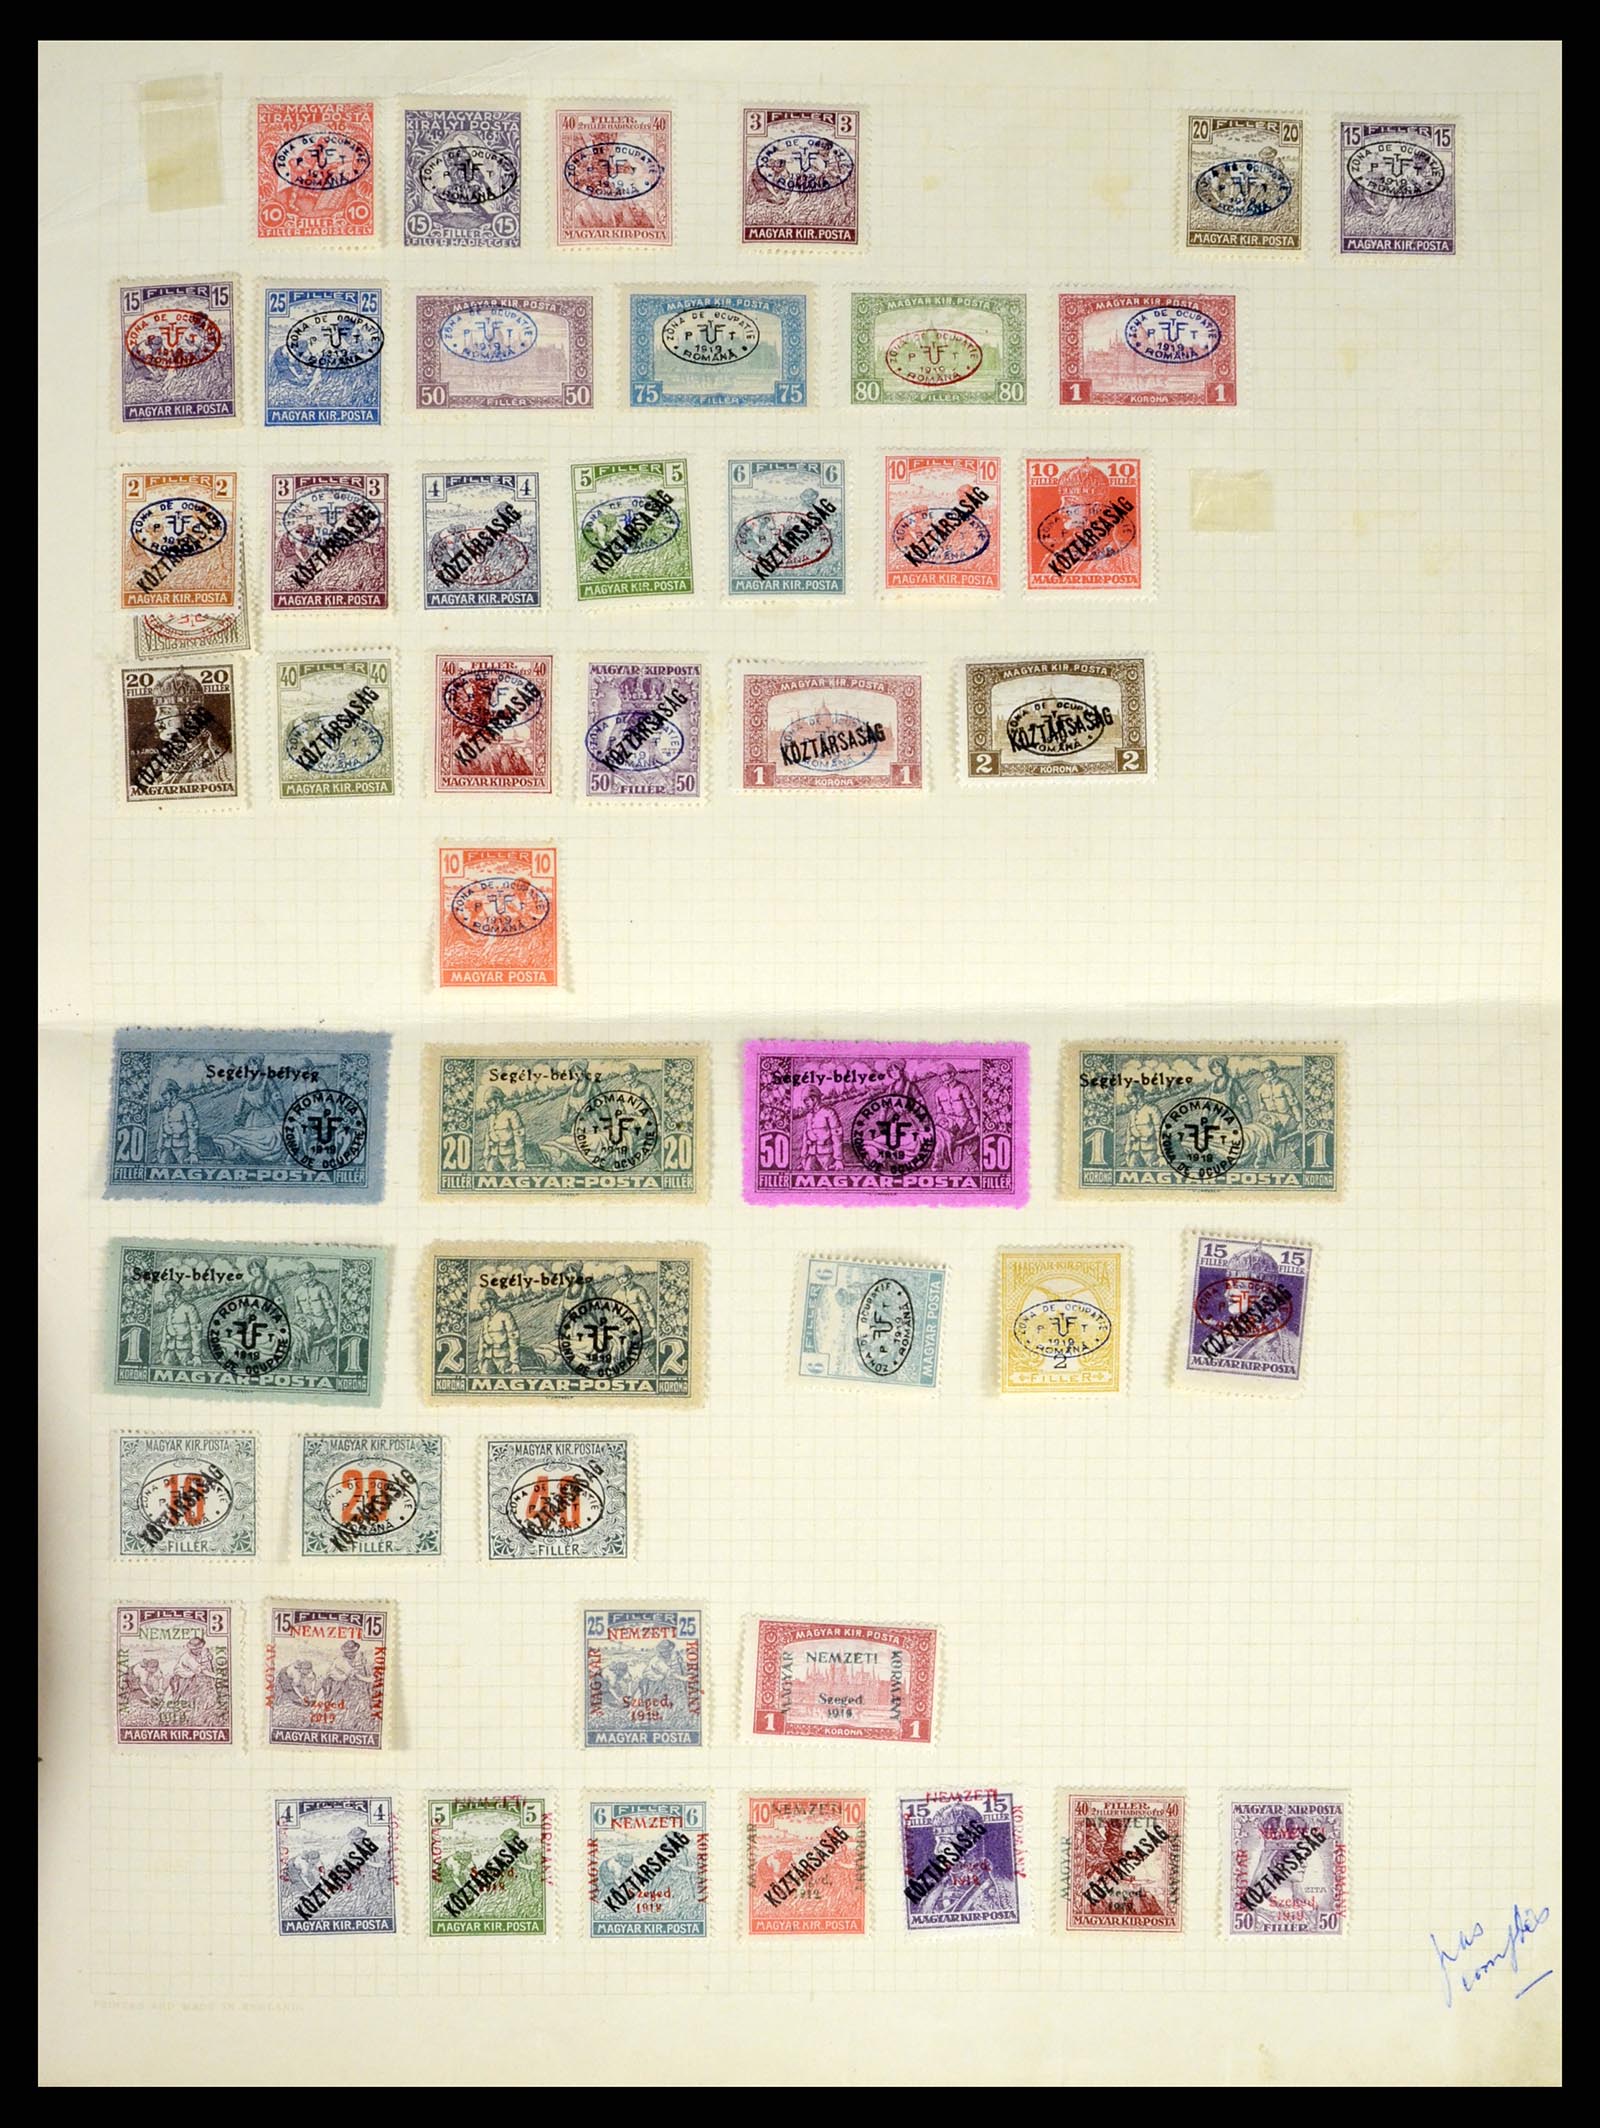 37379 007 - Stamp collection 37379 Hungary territories 1918-1919.